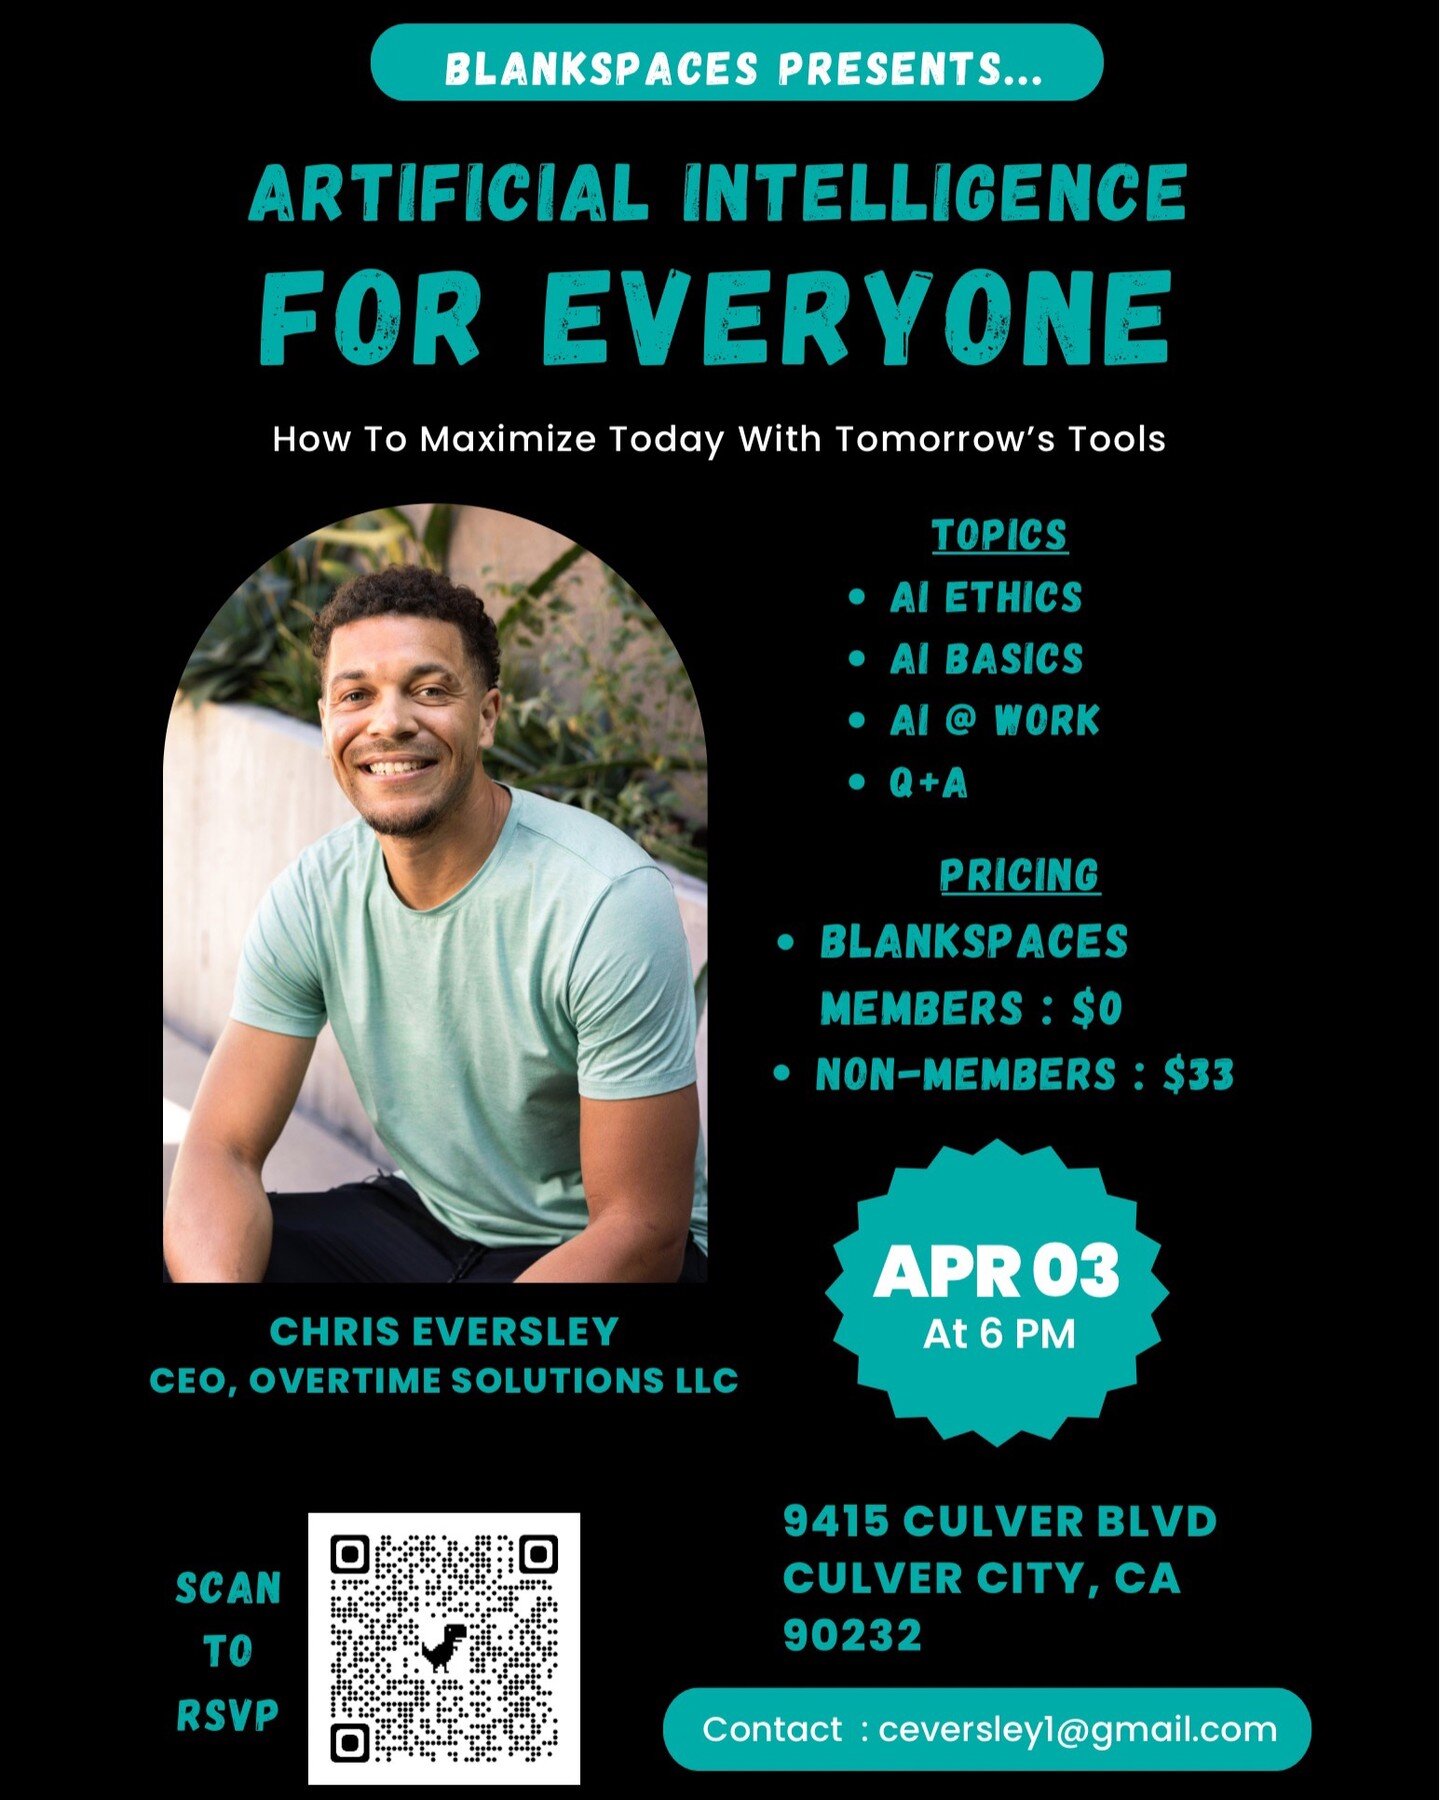 &quot;🚀 Join us at BLANKSPACES on April 3, 2024, at 6 pm for an eye-opening seminar by Chris Eversley on Artificial Intelligence for everyone! Learn &quot;how to maximize today with tomorrow's tools&quot;. 🤖 Members enter for FREE, while non-member